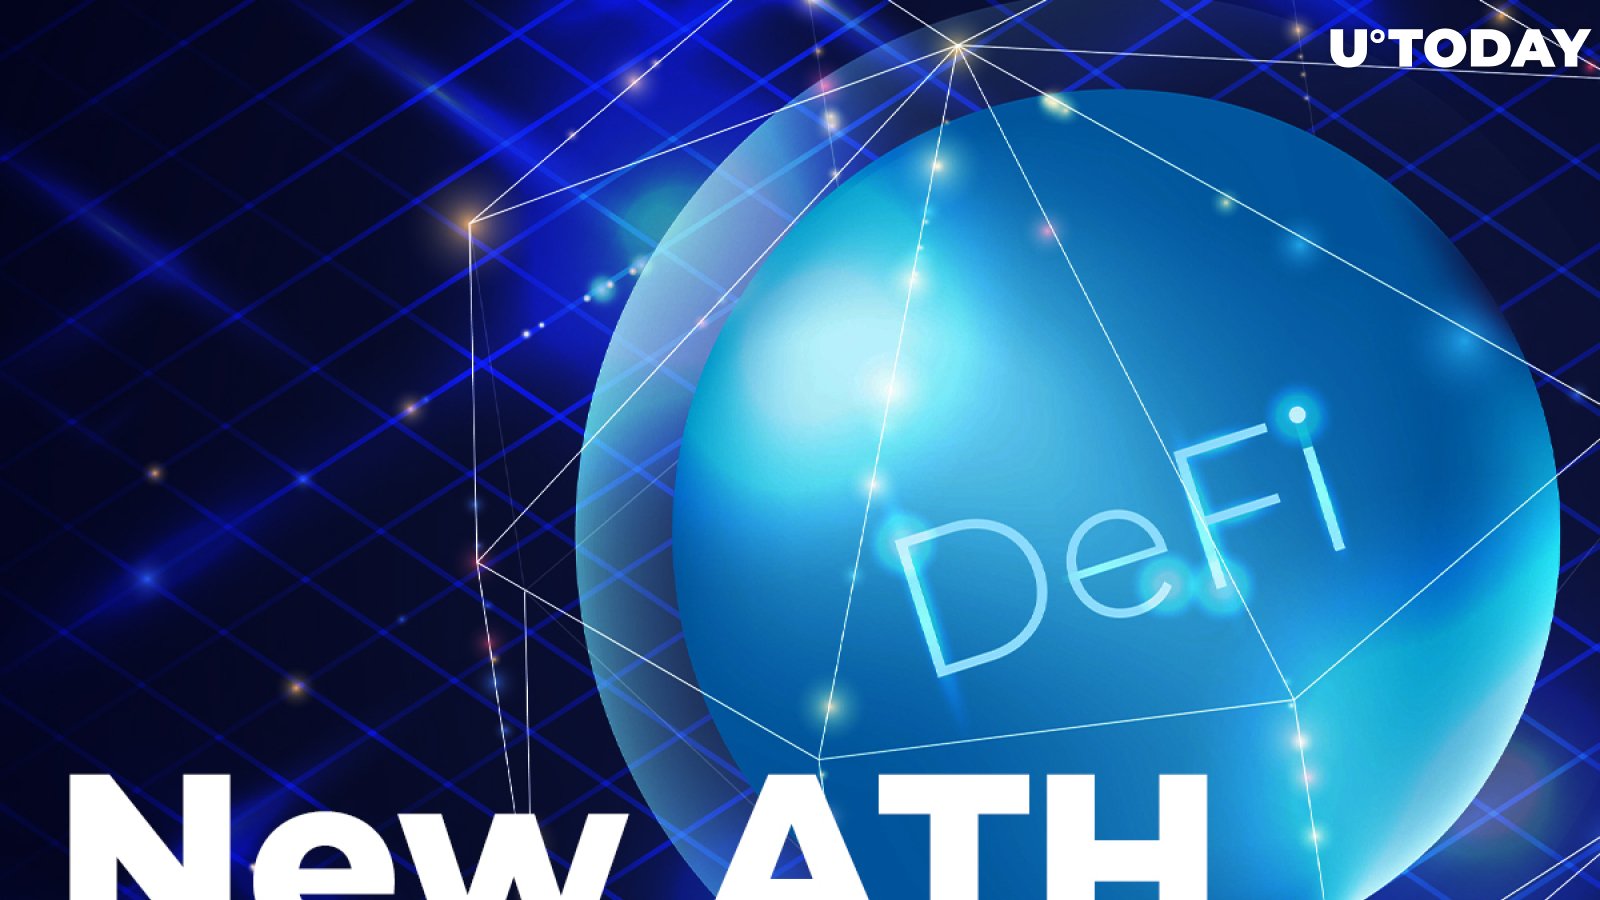 DeFi Industry Reaches New ATH with $210 Billion Total Value Locked Thanks to These Projects